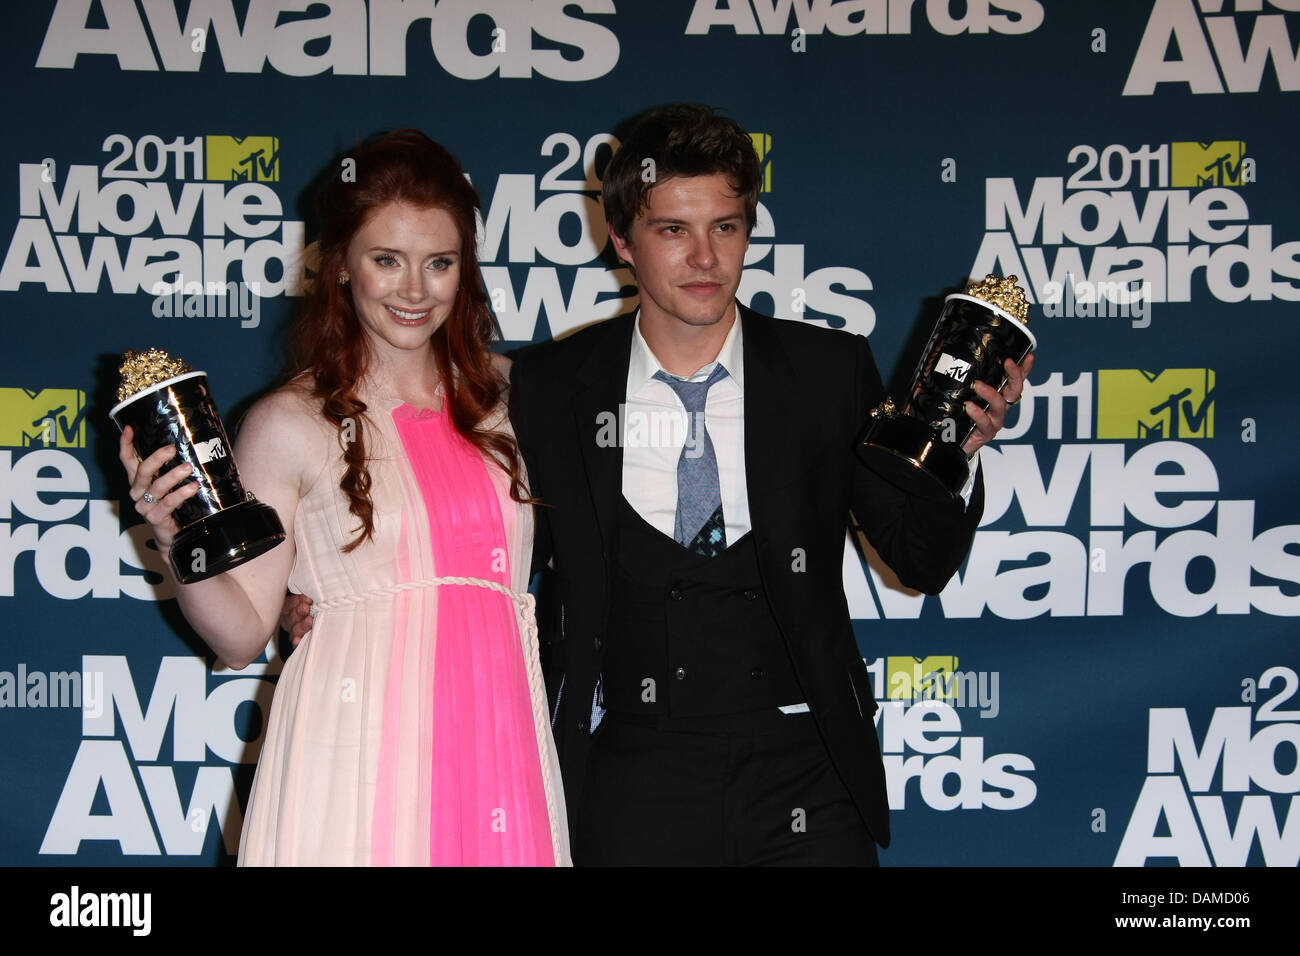 Best Movie Award for 'The Twilight Saga: Eclipse' winning actors Bryce Dallas Howard and Xavier Samuel pose in the photo press room of the MTV Movie Awards at Universal Studio's Gibson Amphitheatre in Universal City/Los Angeles, USA, on 05 June 2011. Photo: Hubert Boesl Stock Photo